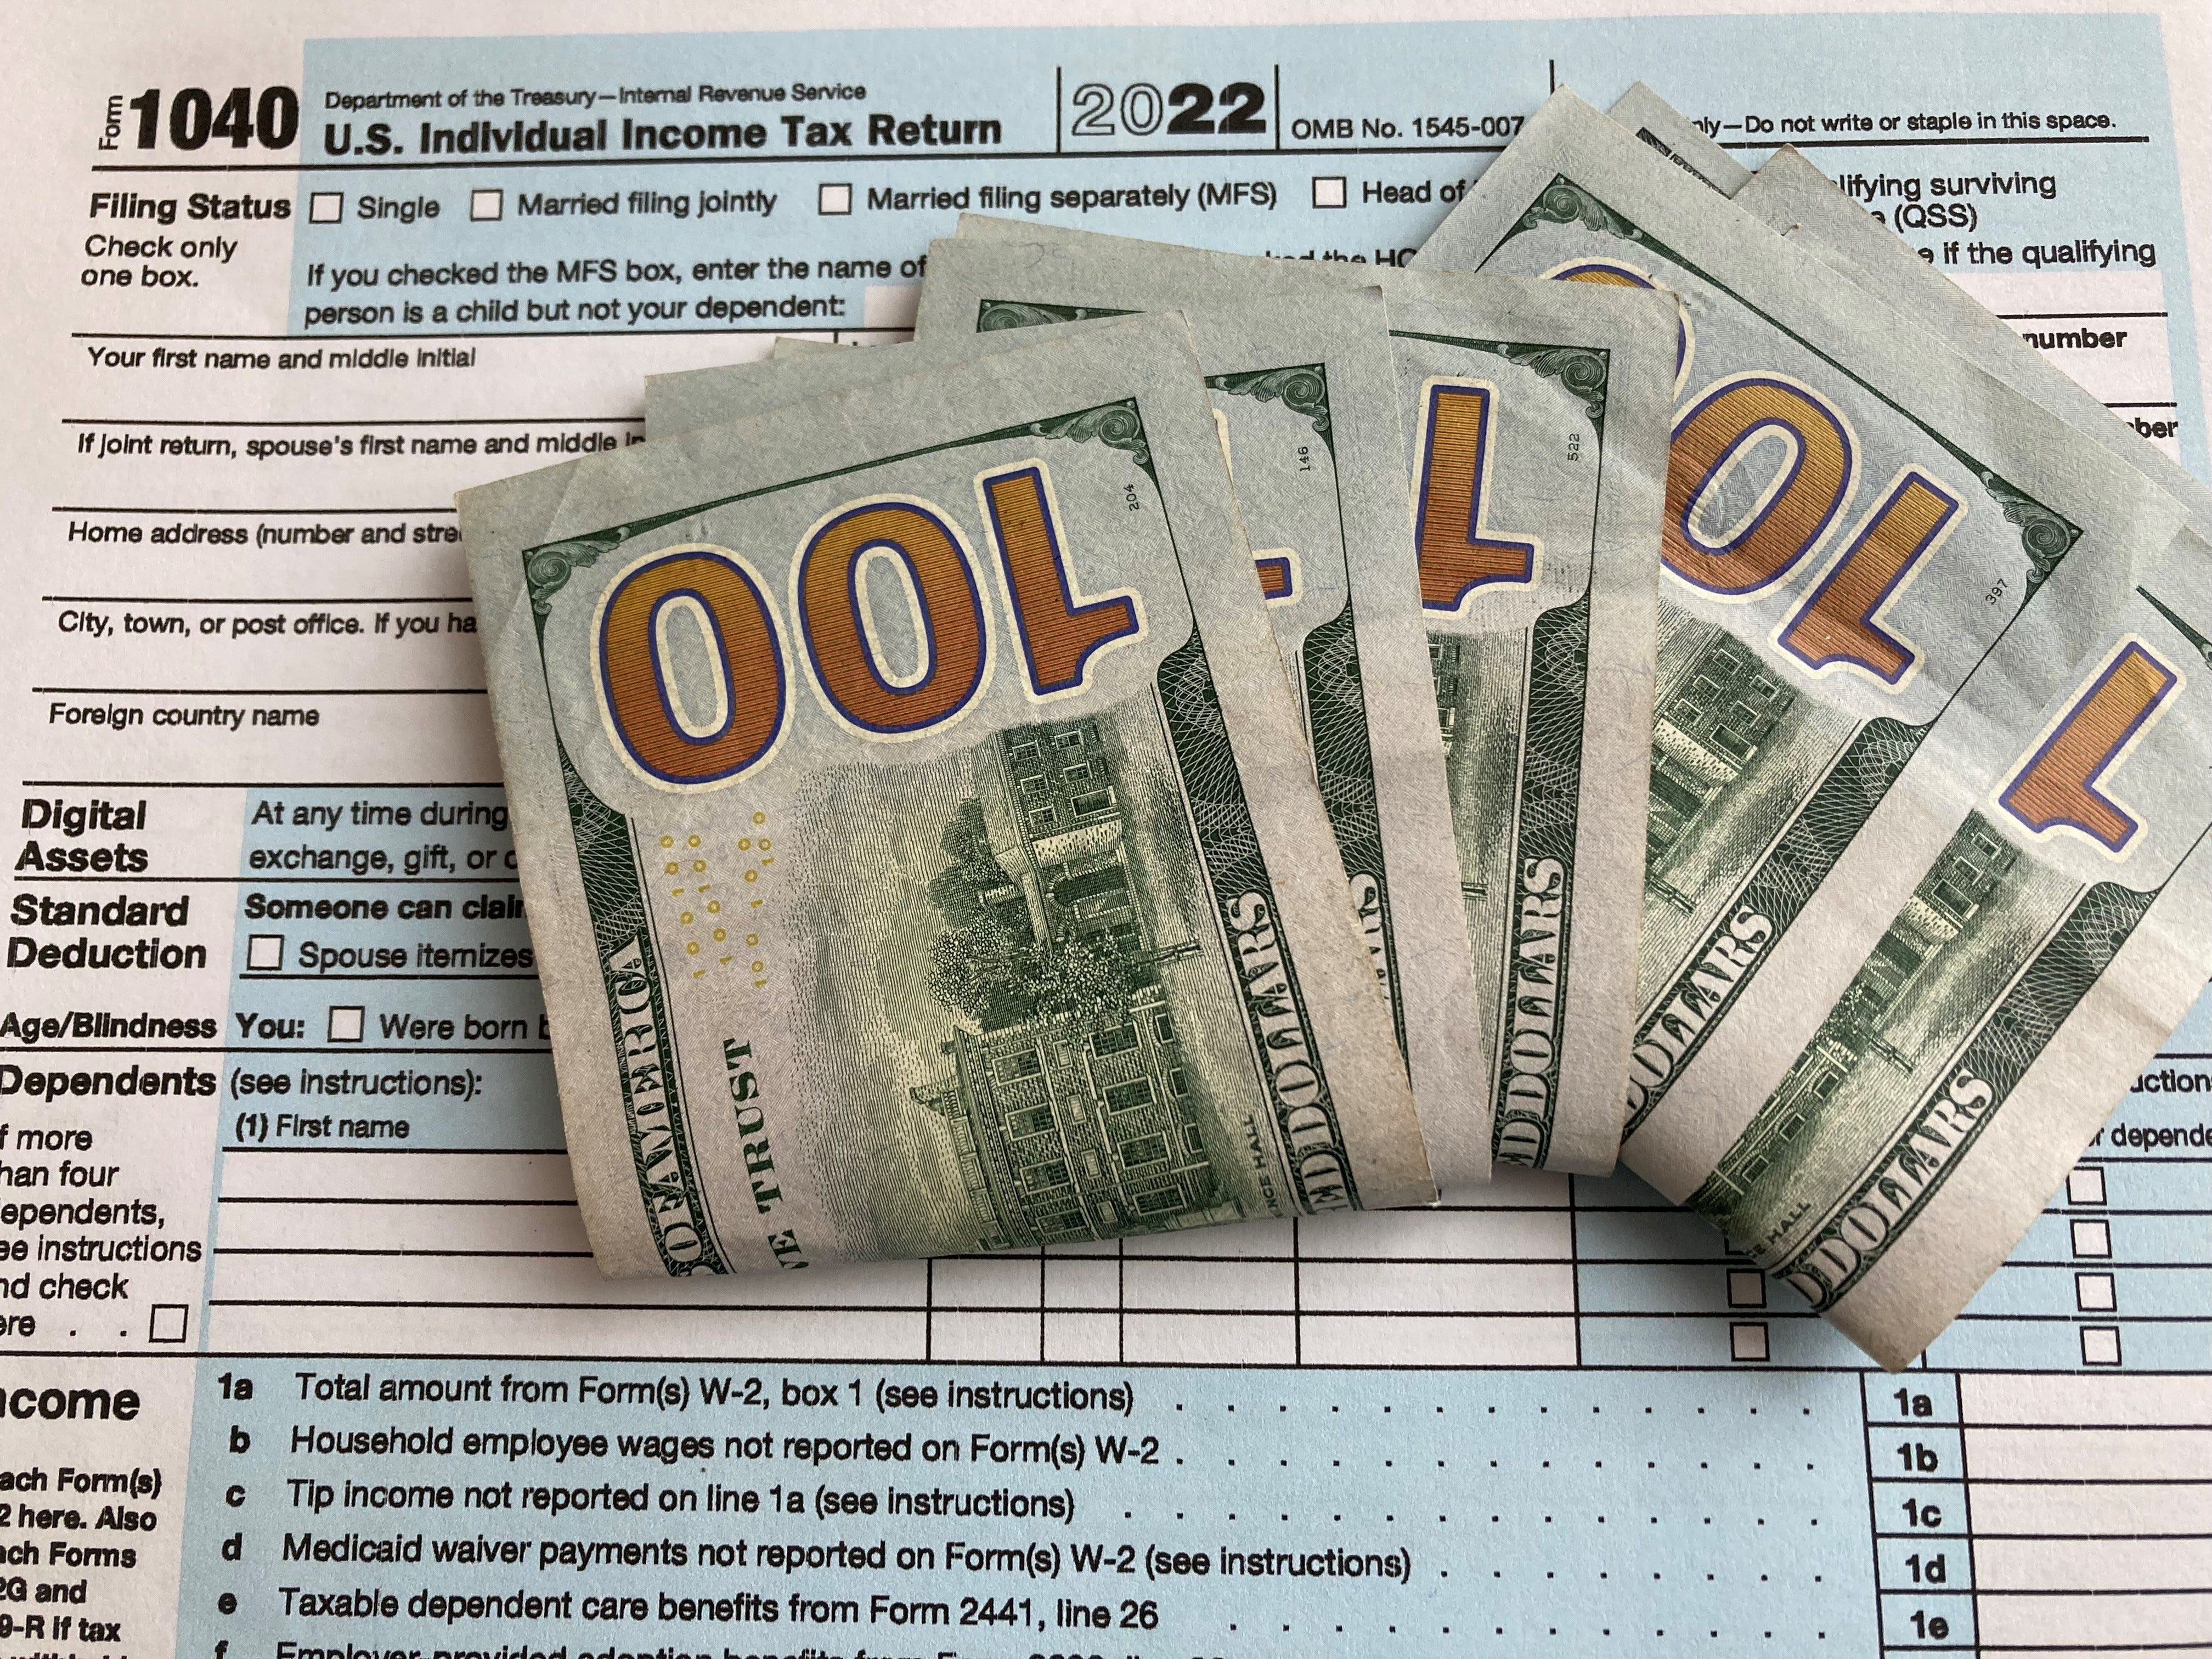 IRS already issues nearly 8 million refunds but average refund is much smaller